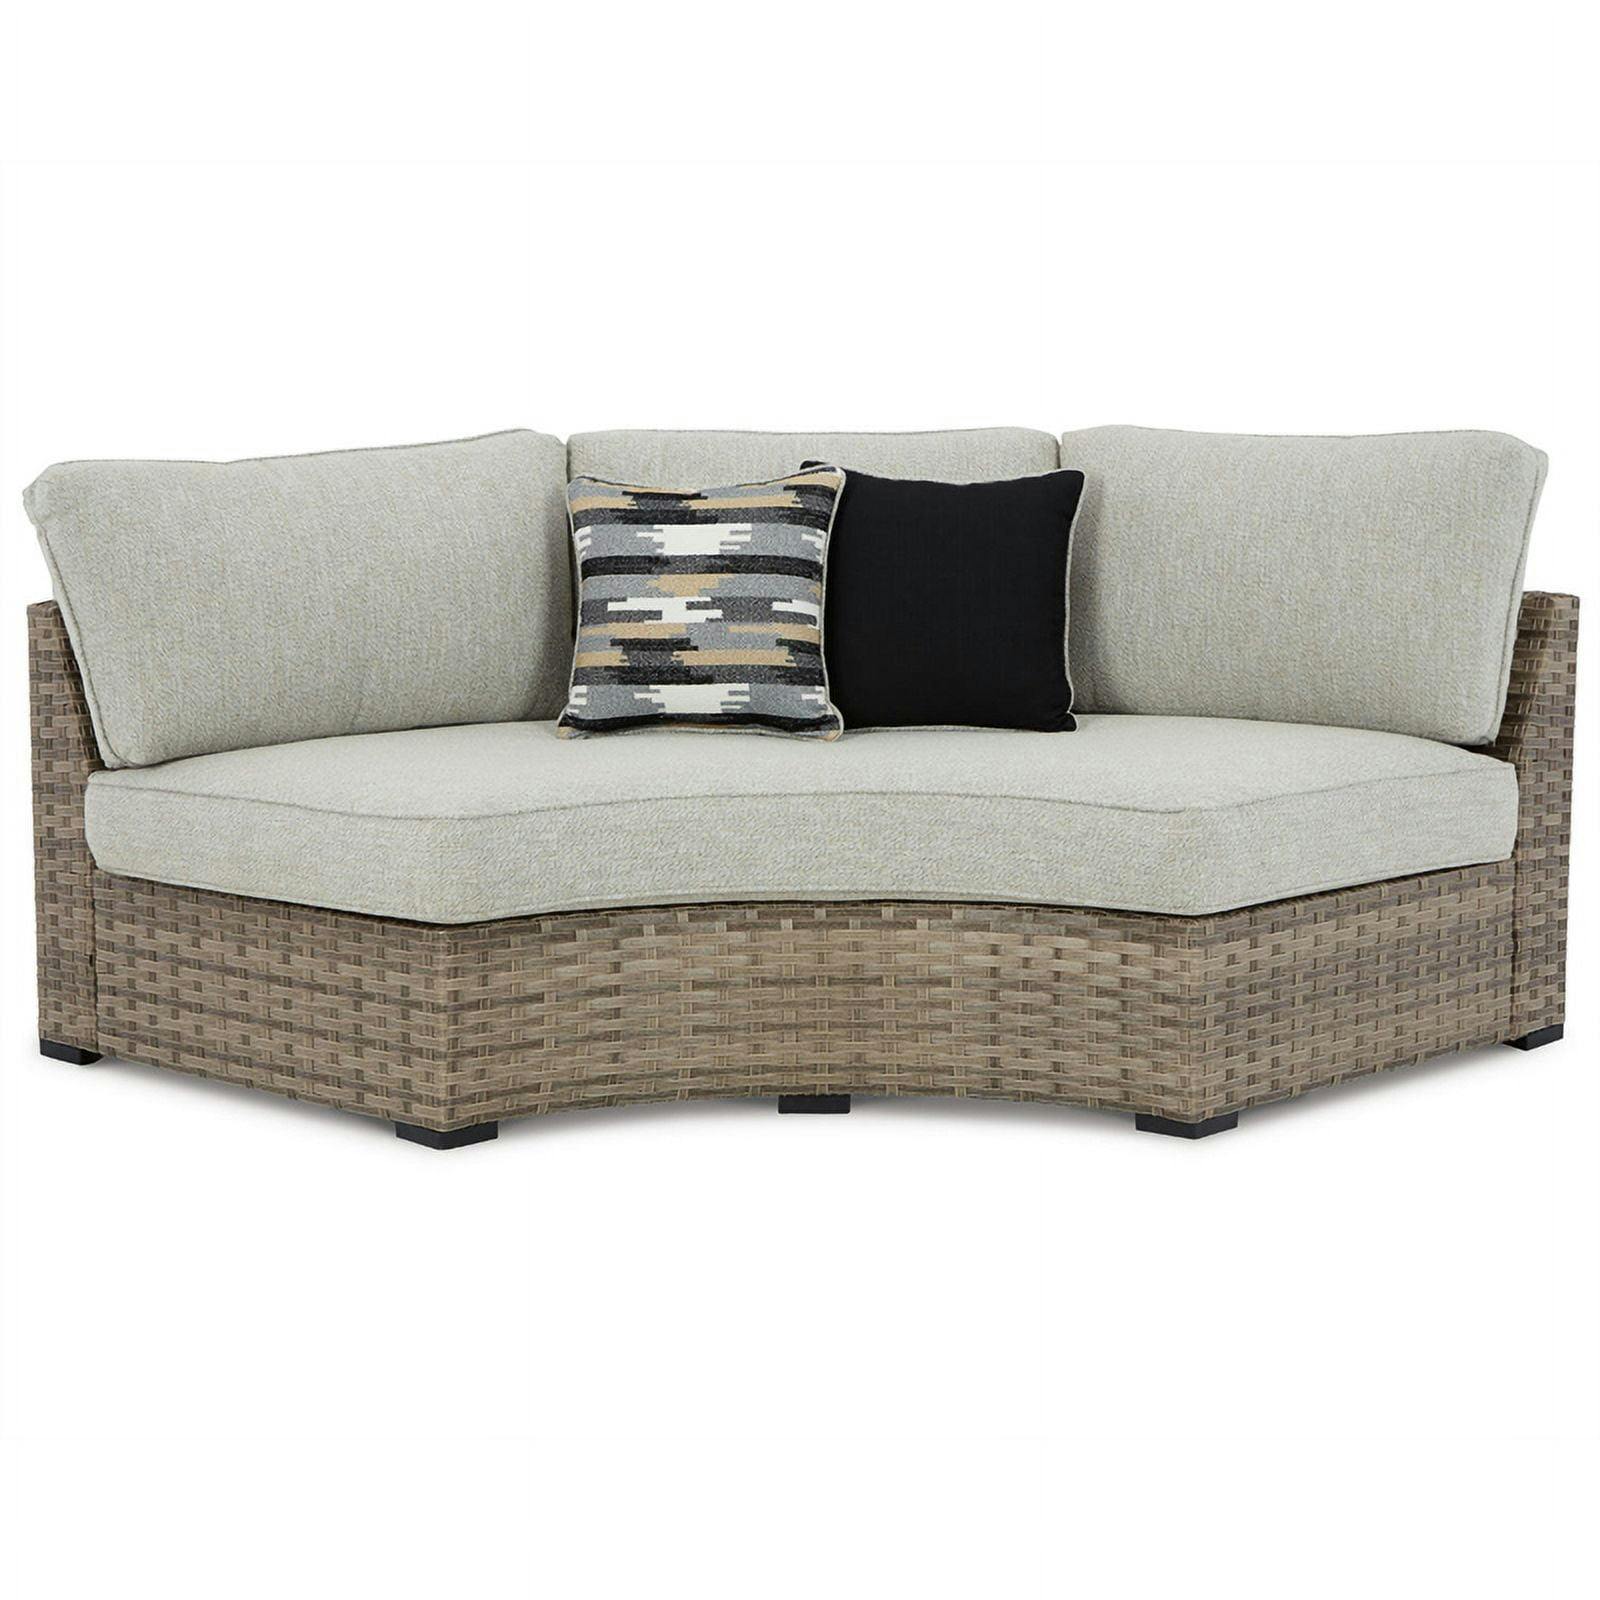 Modern Beige Wicker Sleeper Sectional with Nuvella Cushions